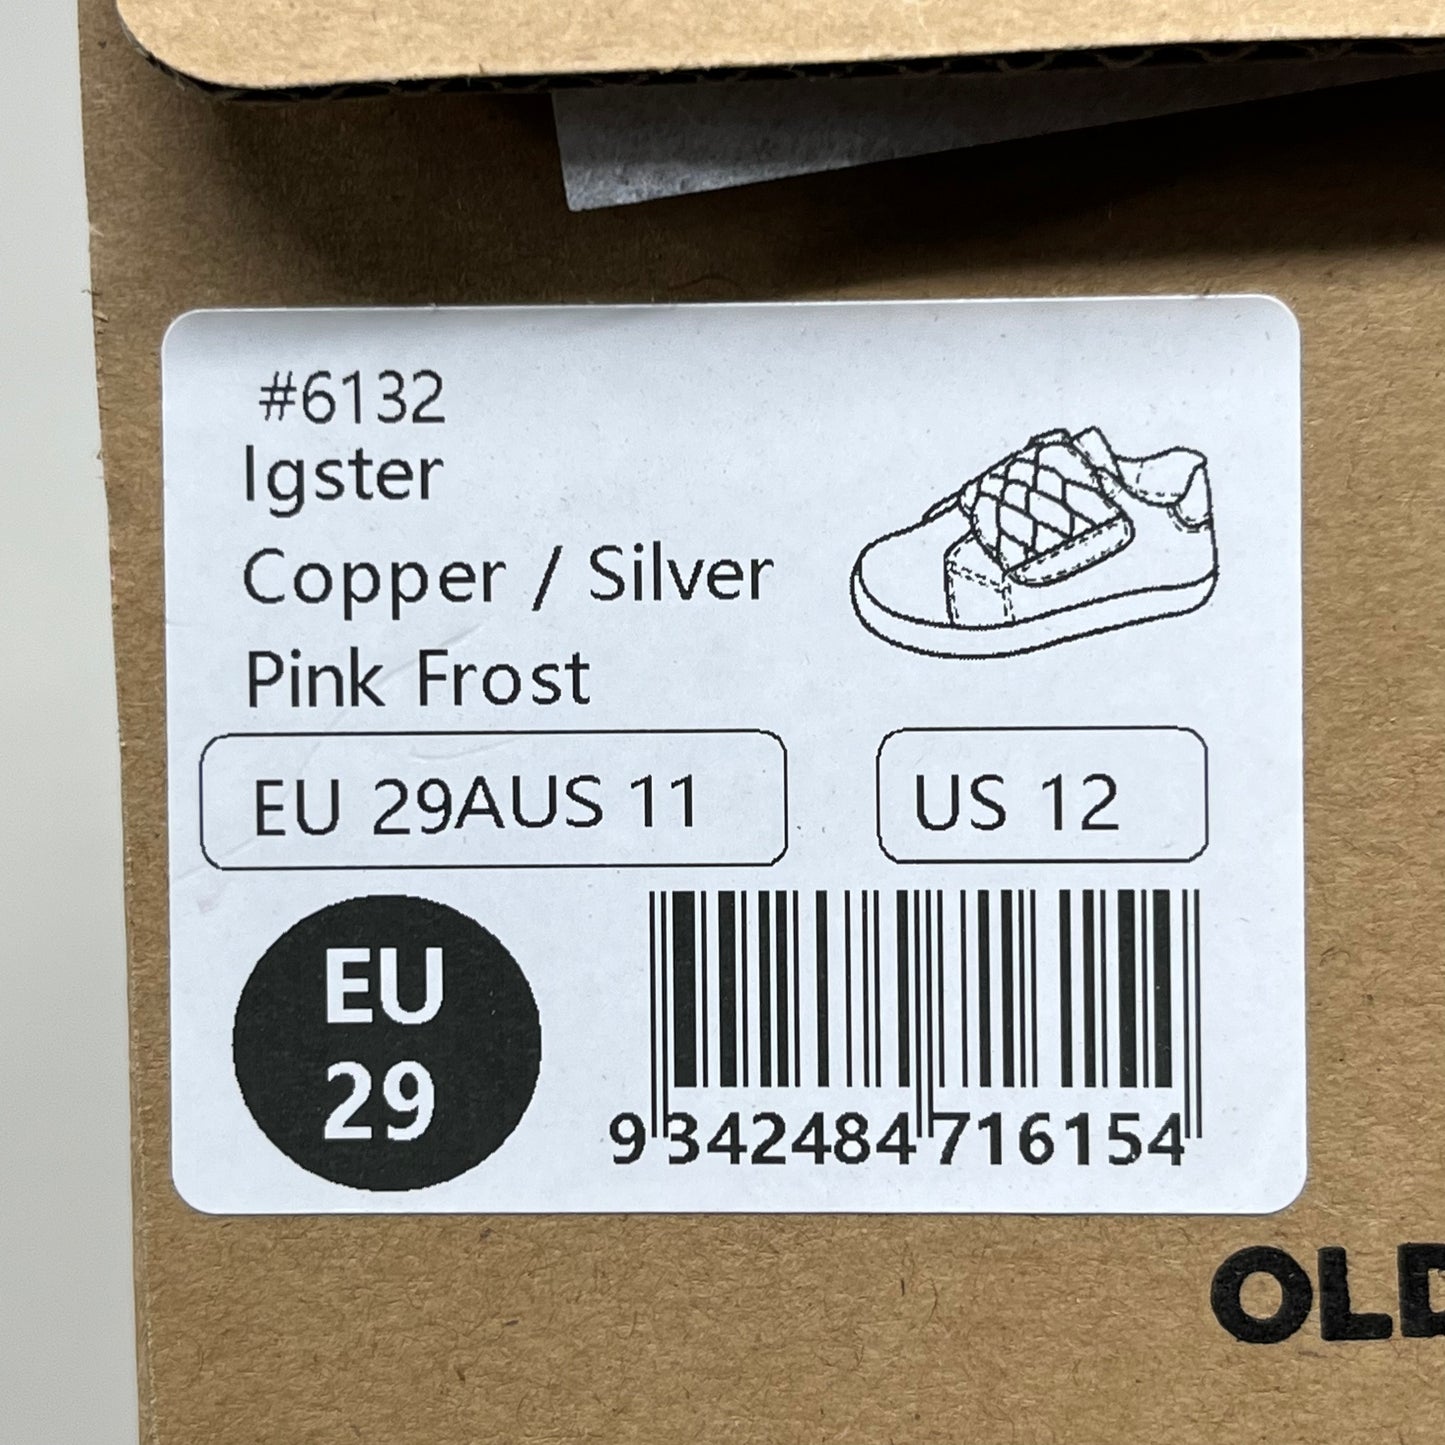 OLD SOLES Igster Sneakers Kid's Leather Shoe Sz 29 US 12 Copper/ Silver/ Pink Frost #6132